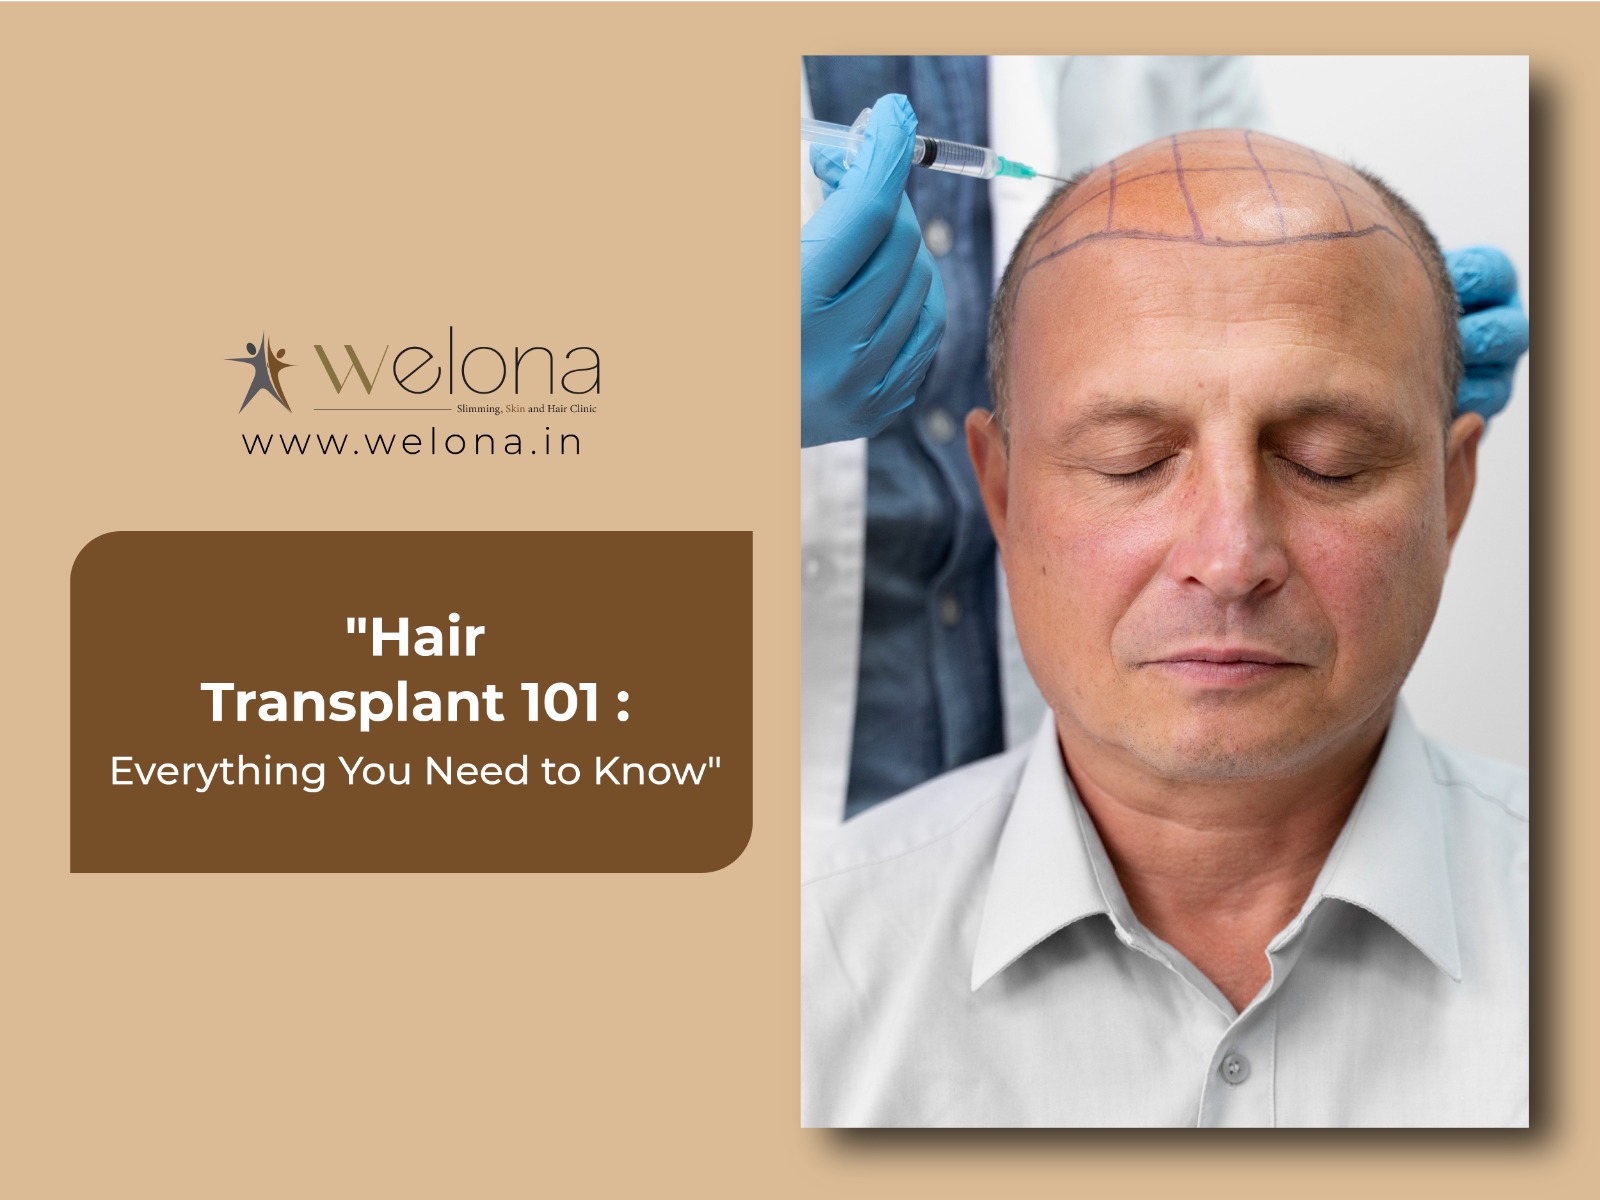 Hair Transplant 101: Everything You Need to Know